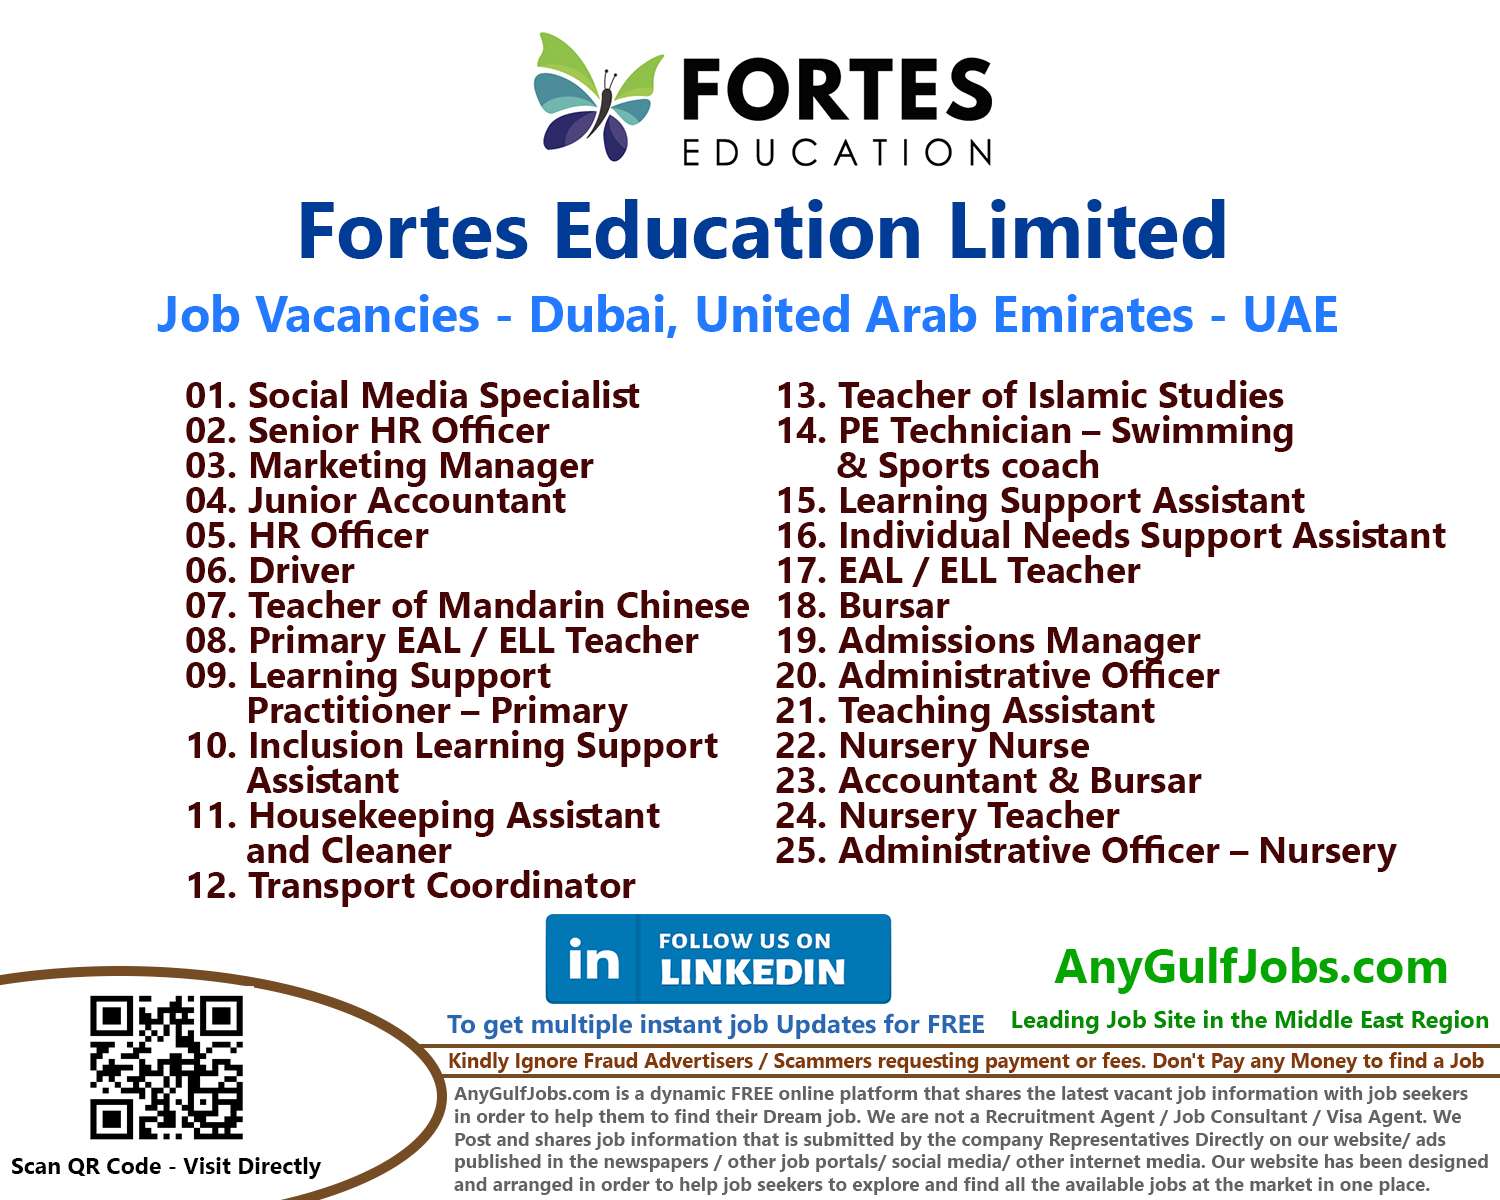 Fortes Education Limited Job Vacancies - Dubai, United Arab Emirates - UAE, And Also We are going to describe to you the ways to get a job in Fortes Education Limited  - Dubai, United Arab Emirates - UAE